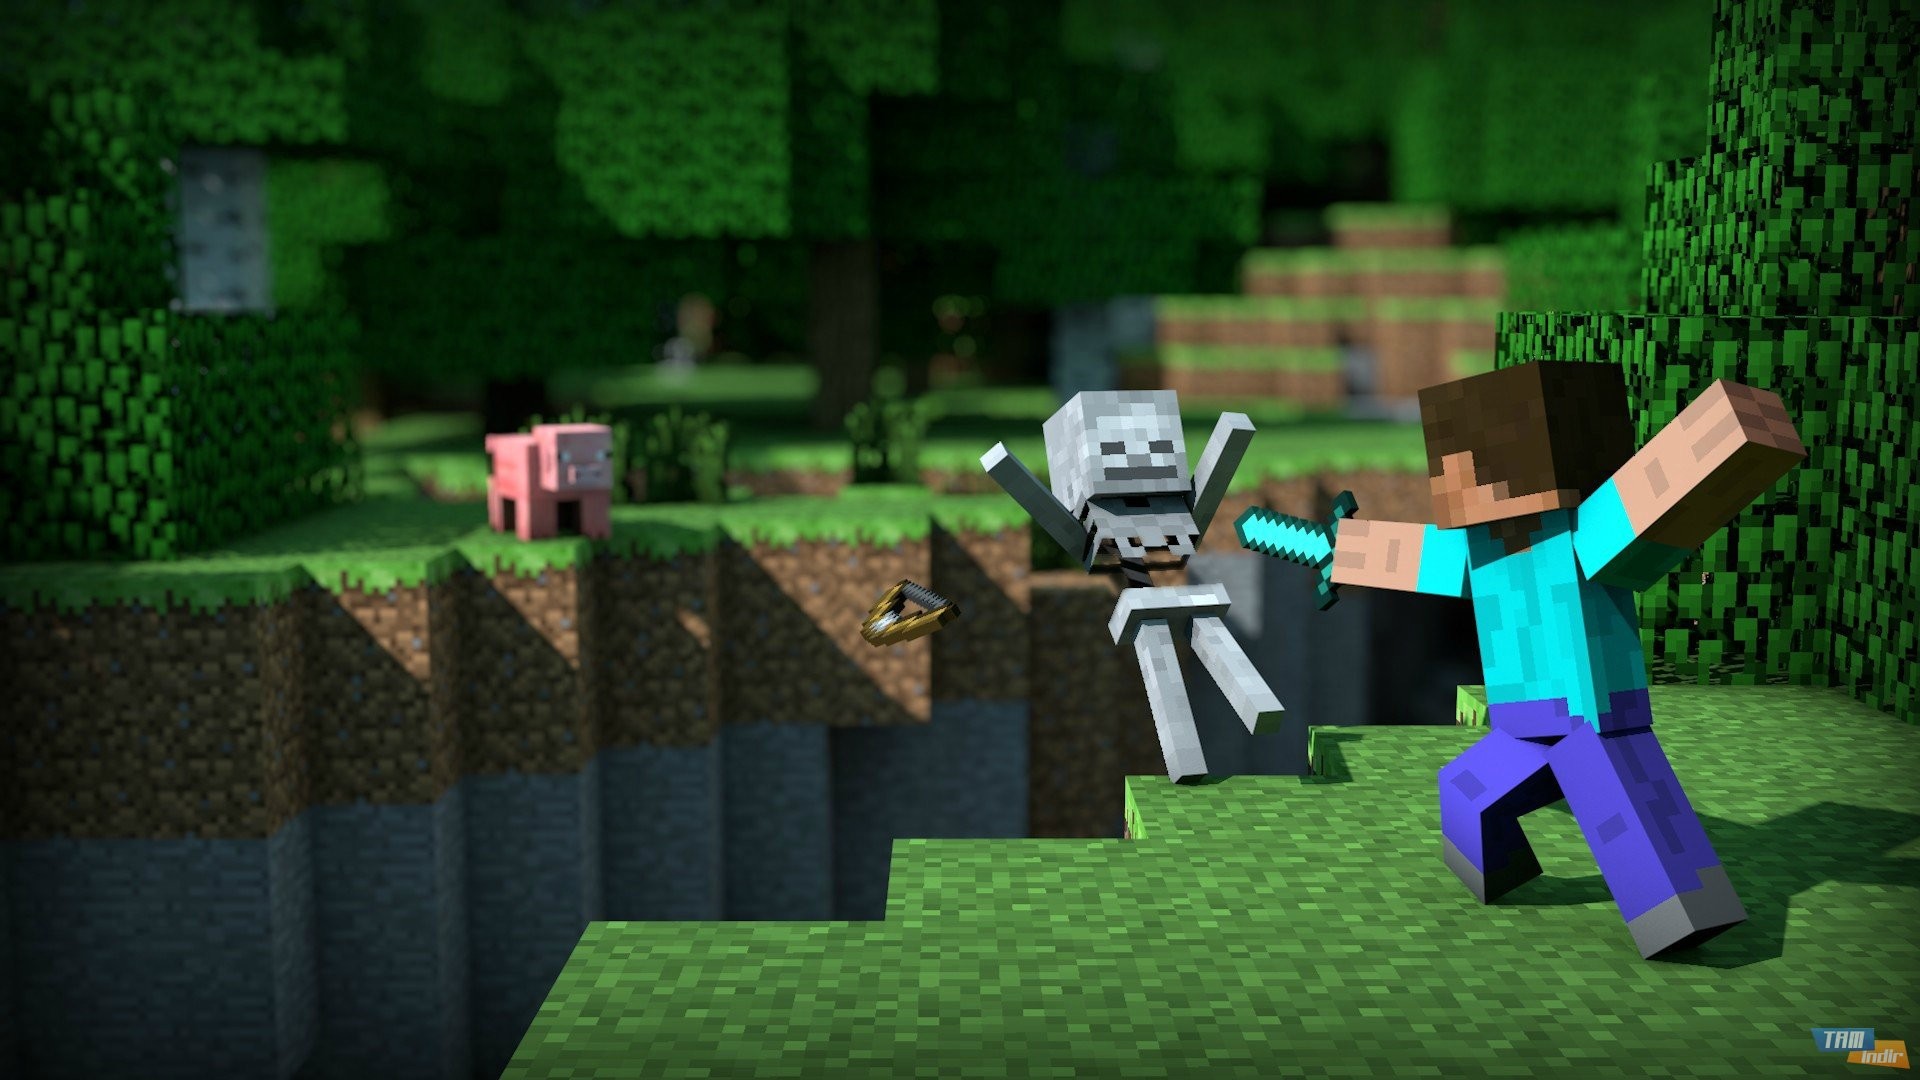 1920x1080 awesome minecraft hd desktop wallpapers 1080p backgrounds 